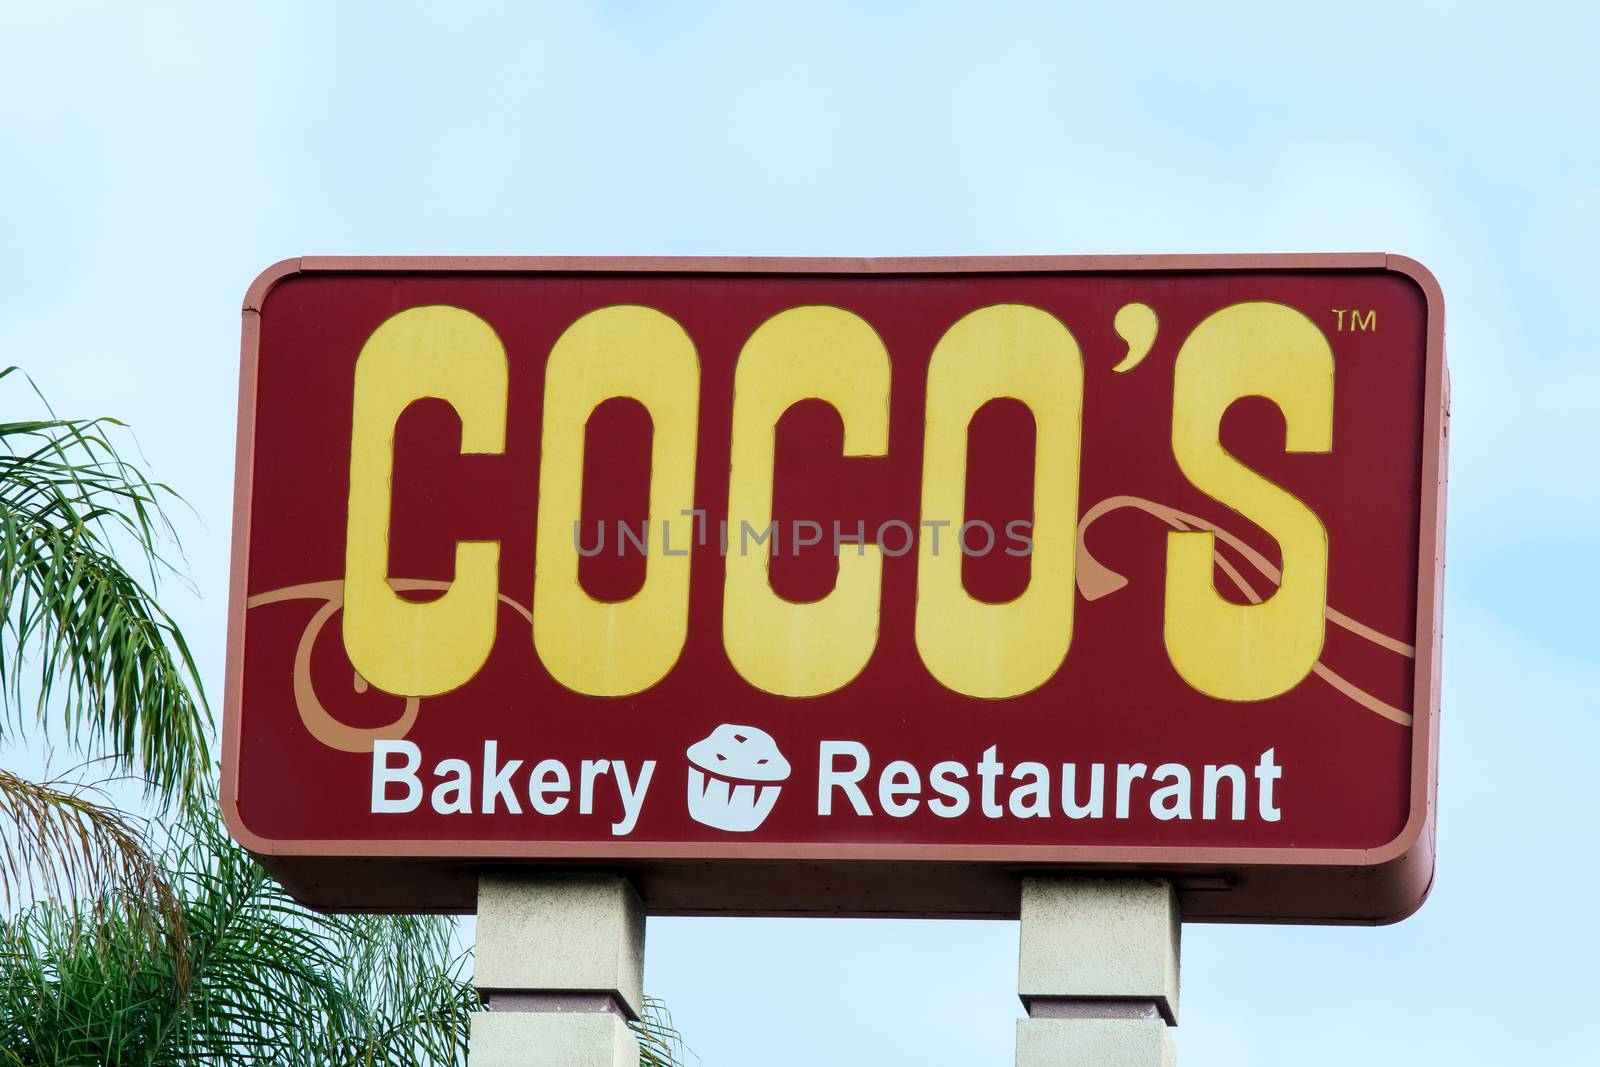 COSTA MESA, CA/USA - OCTOBER 17, 2015: Coco's Bakery Restaurant sign. Coco's  is a chain of restaurants in the United States.